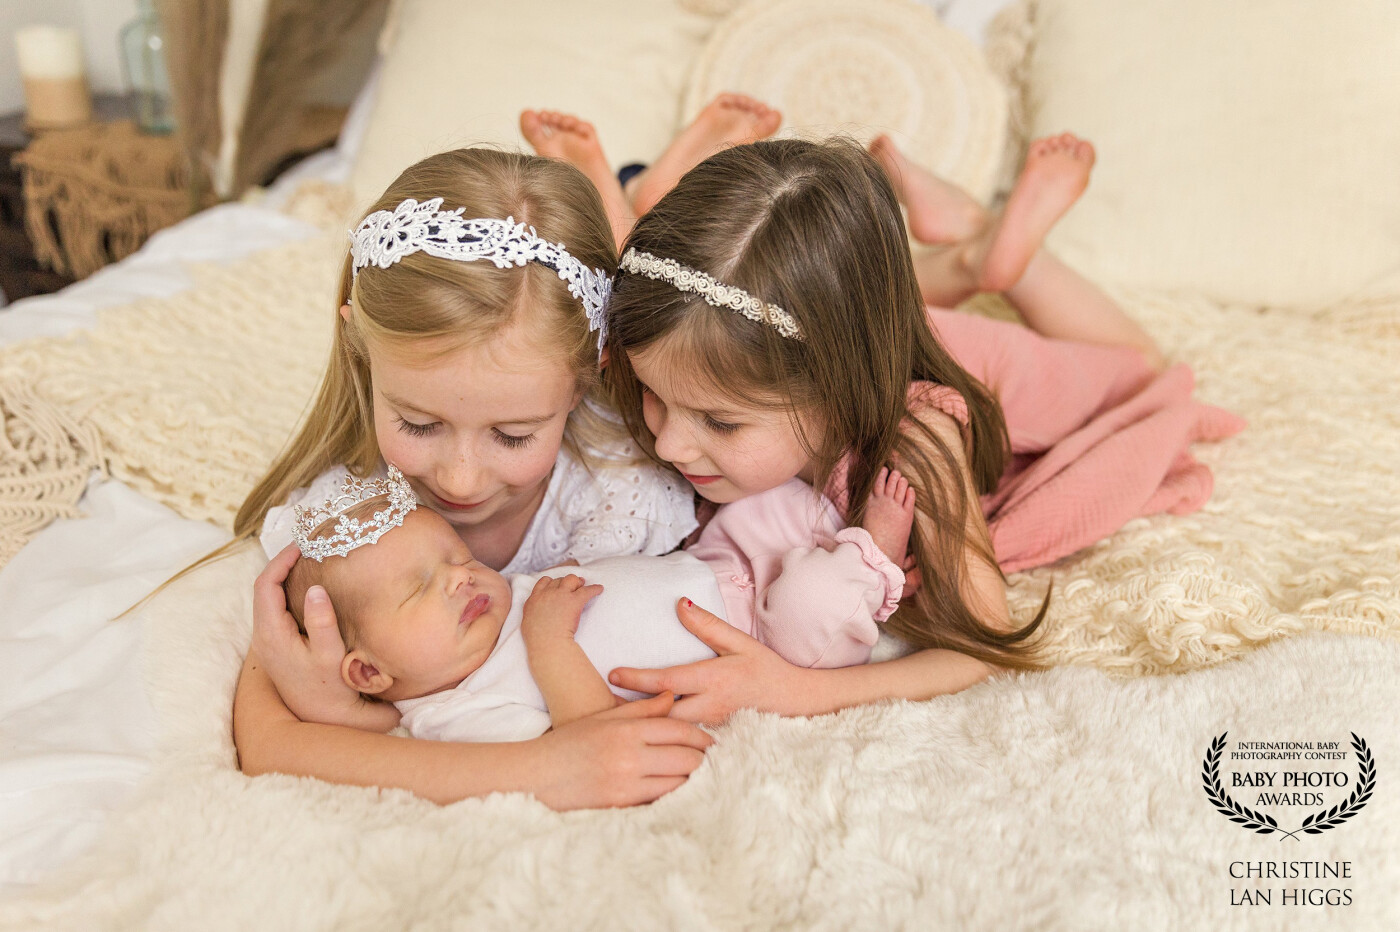 A new princess was born into this sweet sisterhood. Such a beautiful start to a lifelong  friendship between these three sisters.